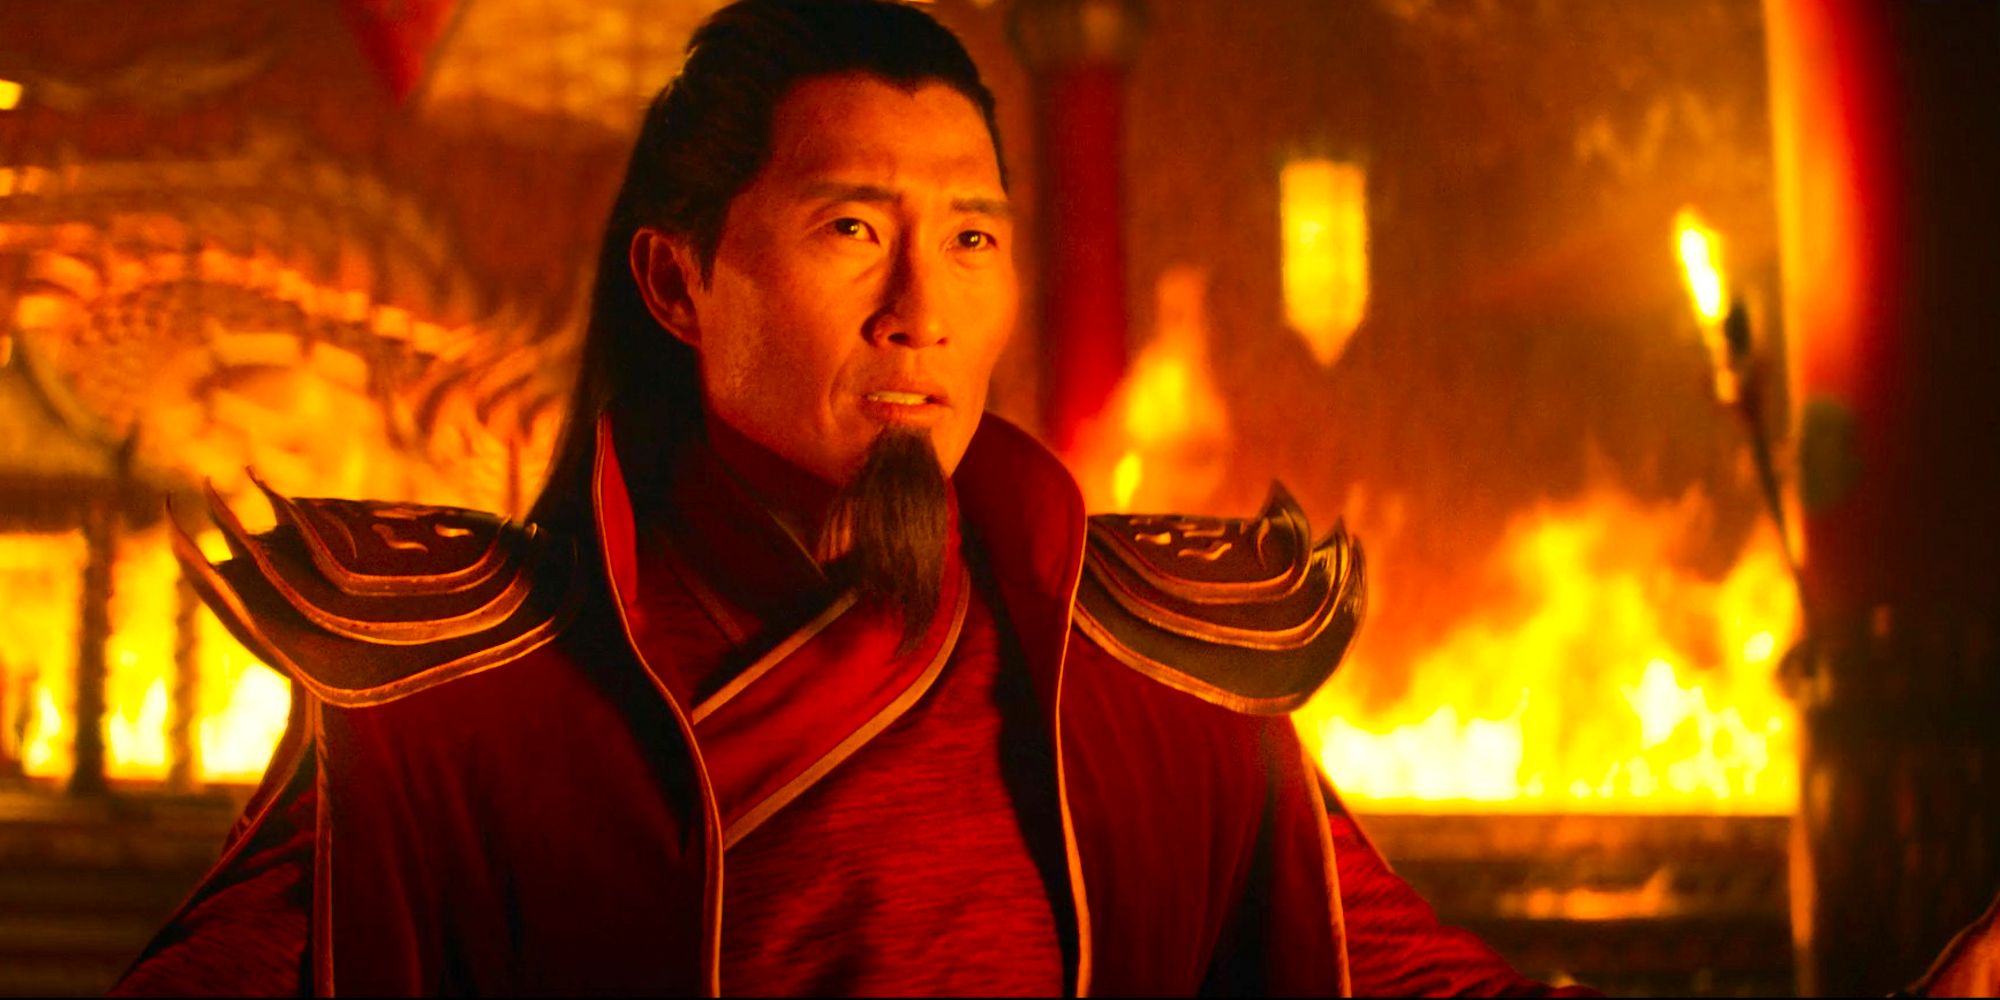 Fire Lord Sozin from Avatar the last airbender close up fire throne on the background Daniel Dae Kim as Fire Lord Ozai